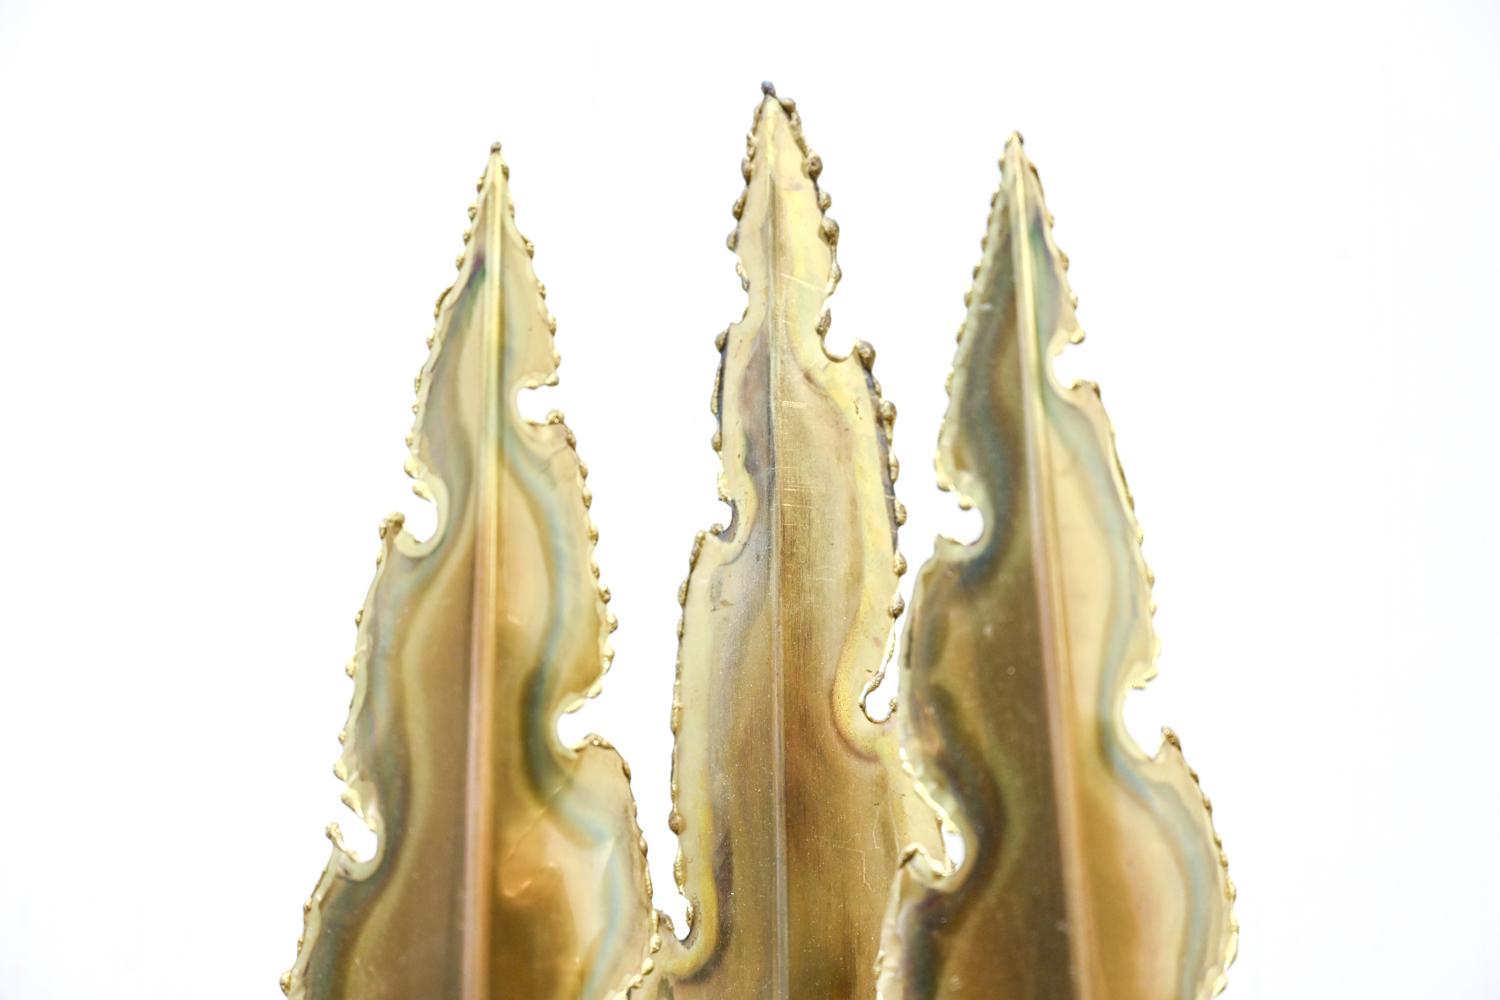 20th Century Pair of Brutalist Torch-Cut Brass Wall Sconces by Holm Sørensen, c. 1960's